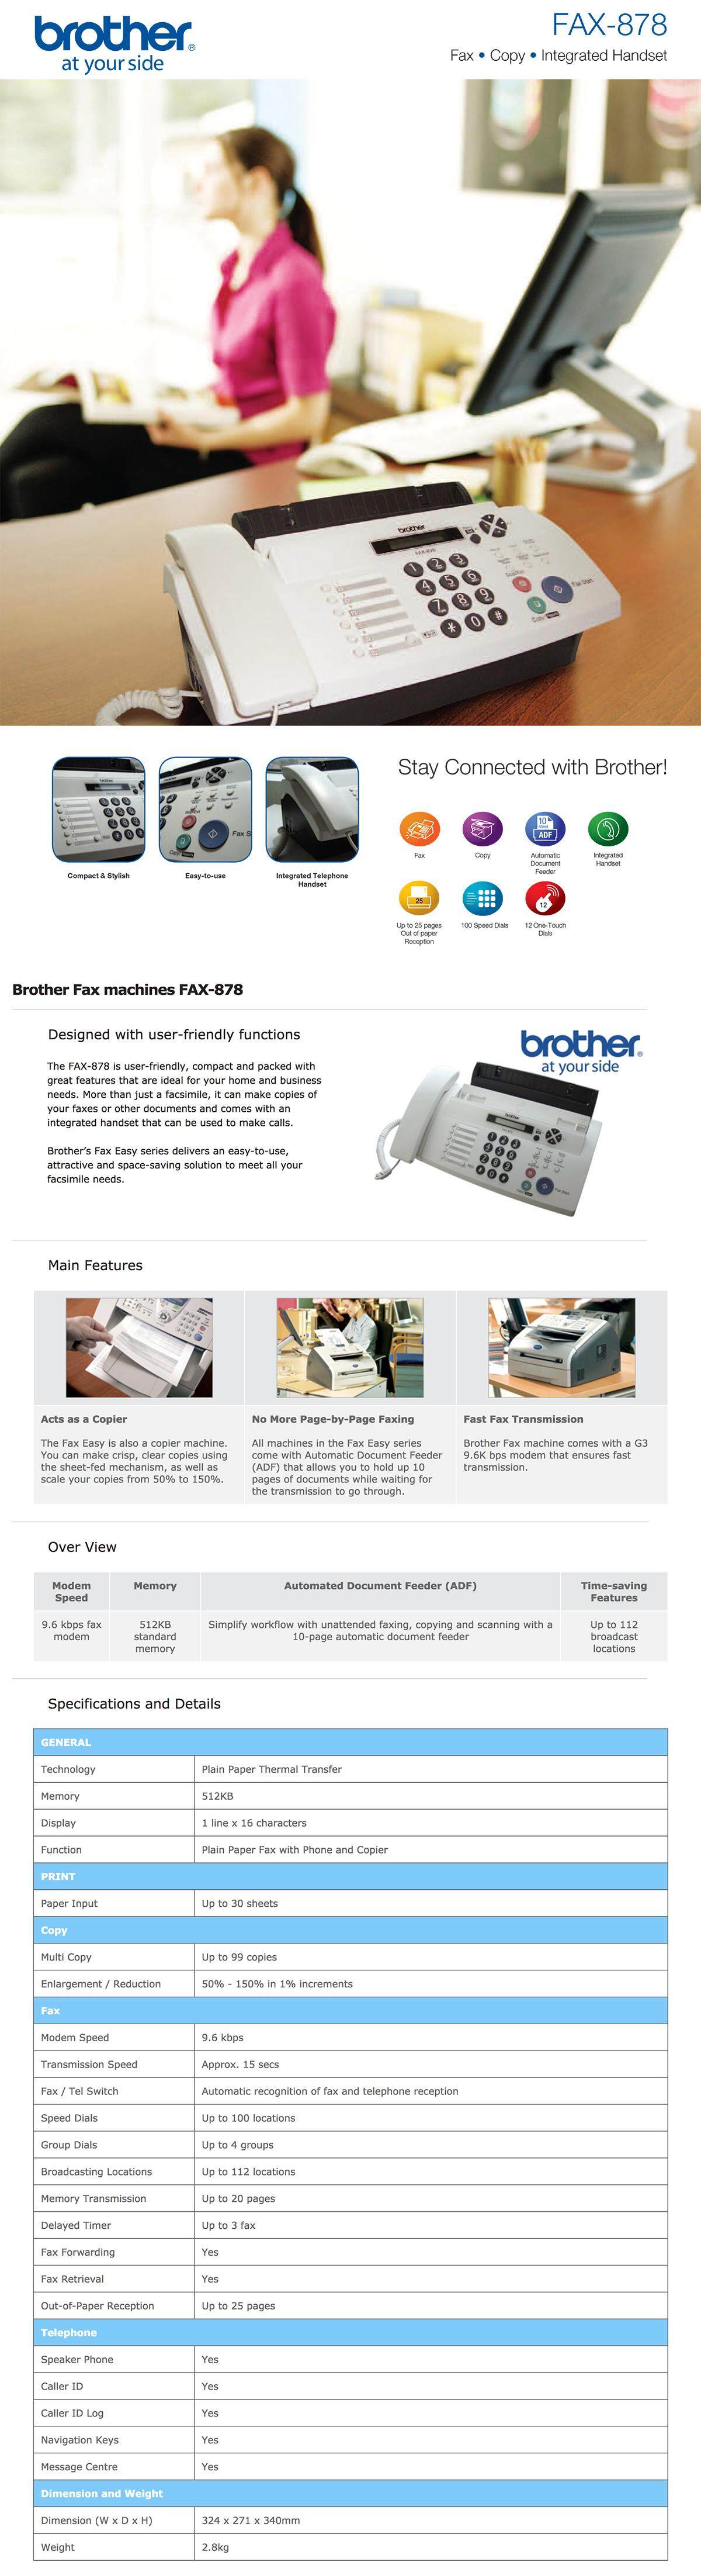 Brother Fax Machines FAX-878 - Plain Paper Thermal Transfer